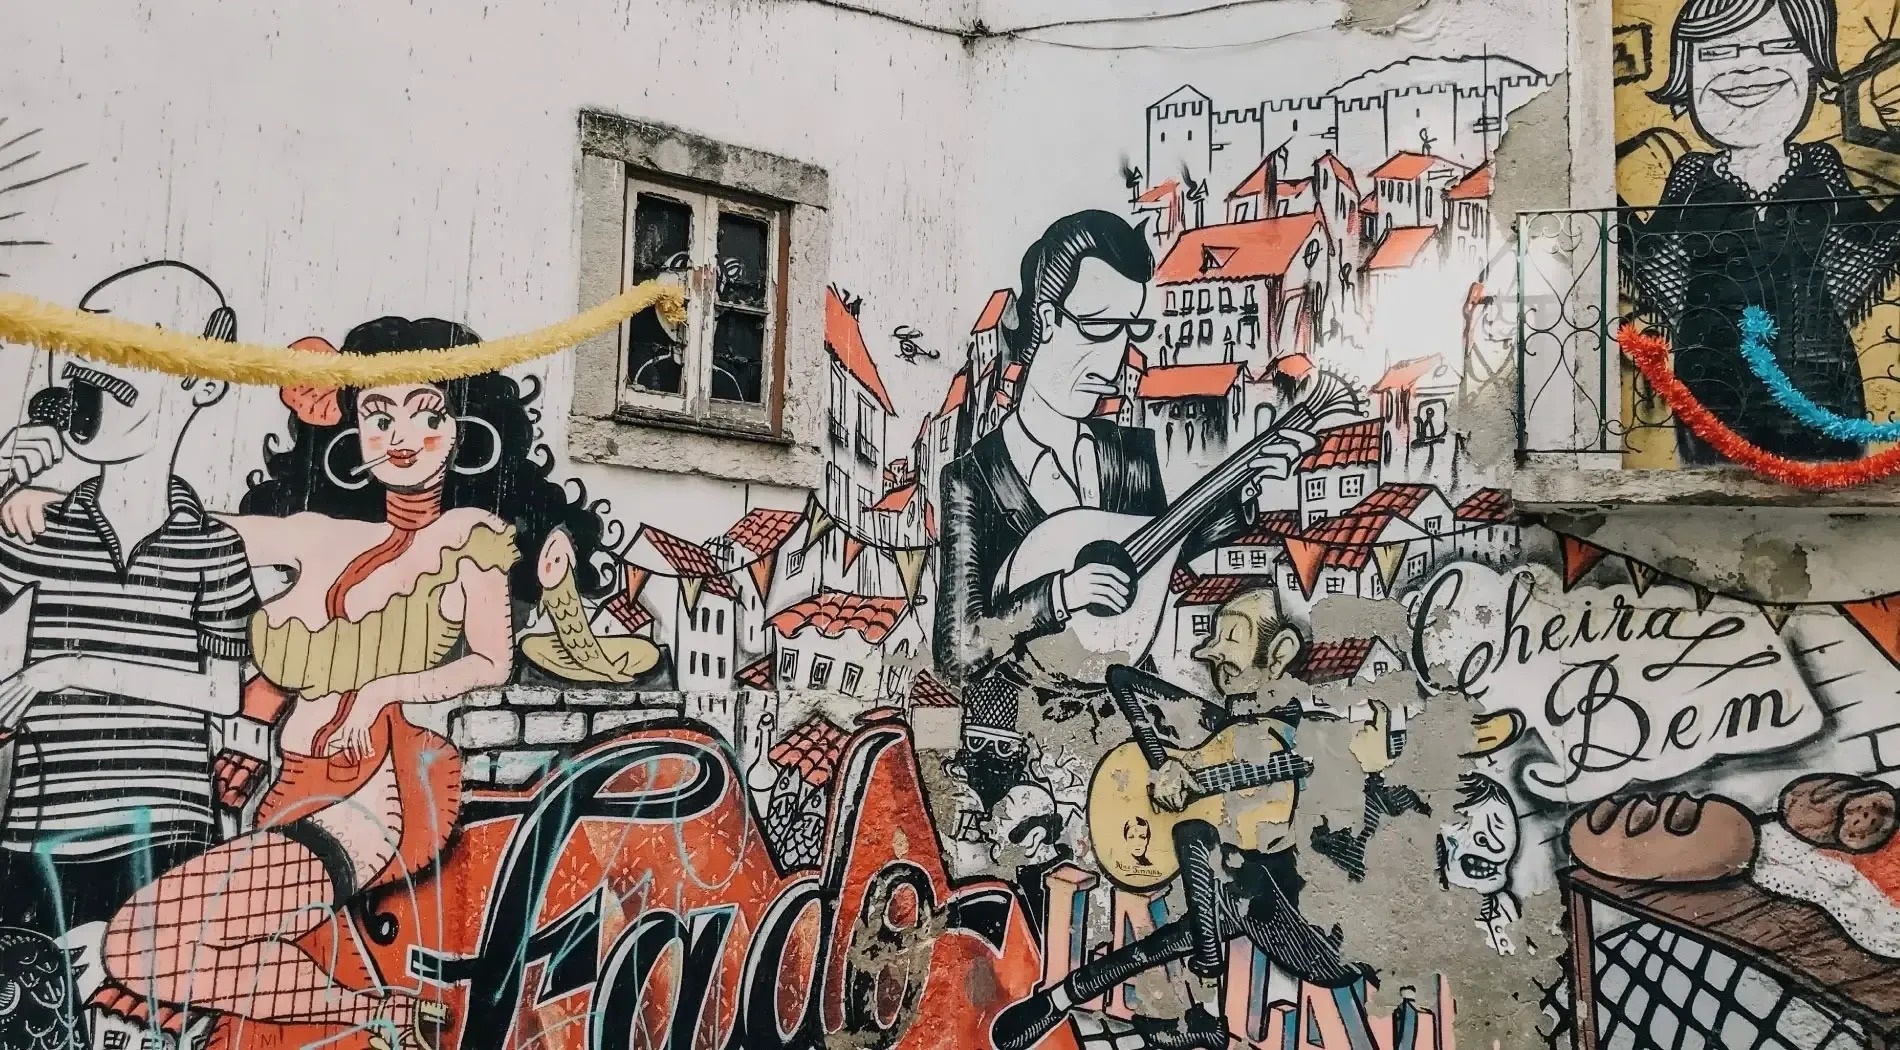 a mural on a wall shows a man playing a guitar and a woman singing